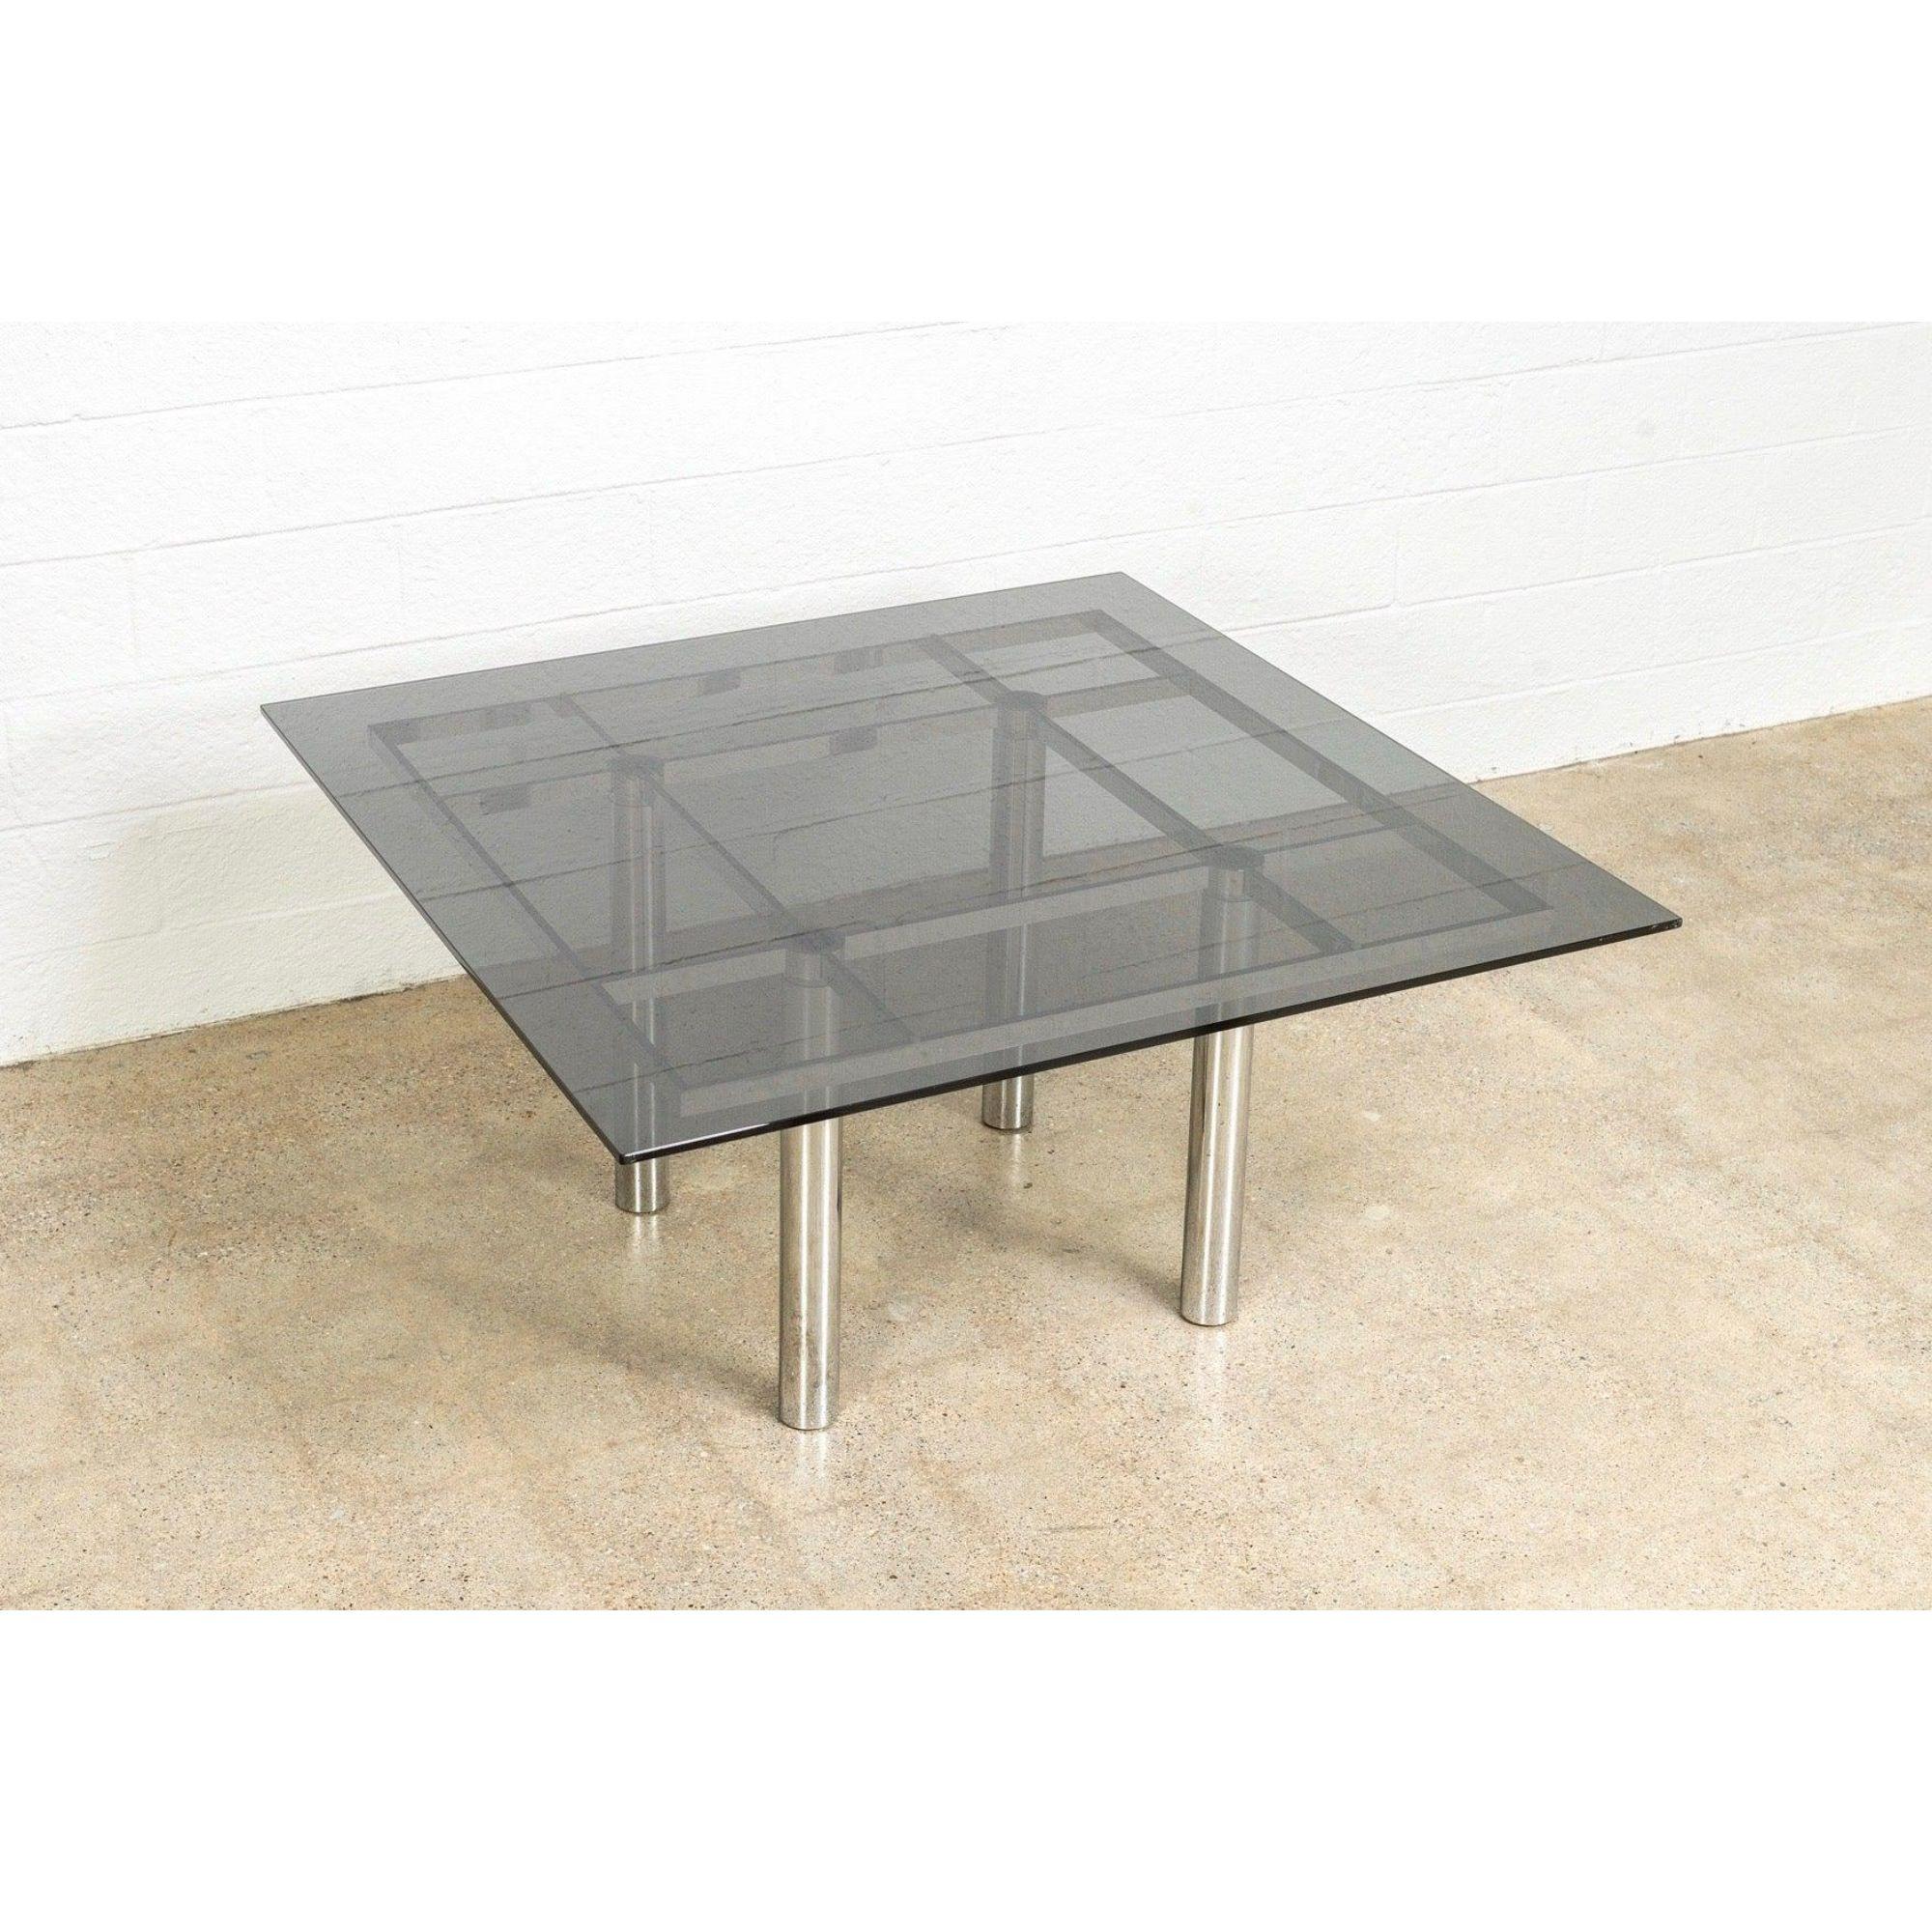 This mid century modernist “Andre” square glass and chrome table designed by Tobia Scarpa for Knoll International is circa 1970. The table is heavy and solid and exceptionally crafted from premium materials. The sleek design has a clean minimalist